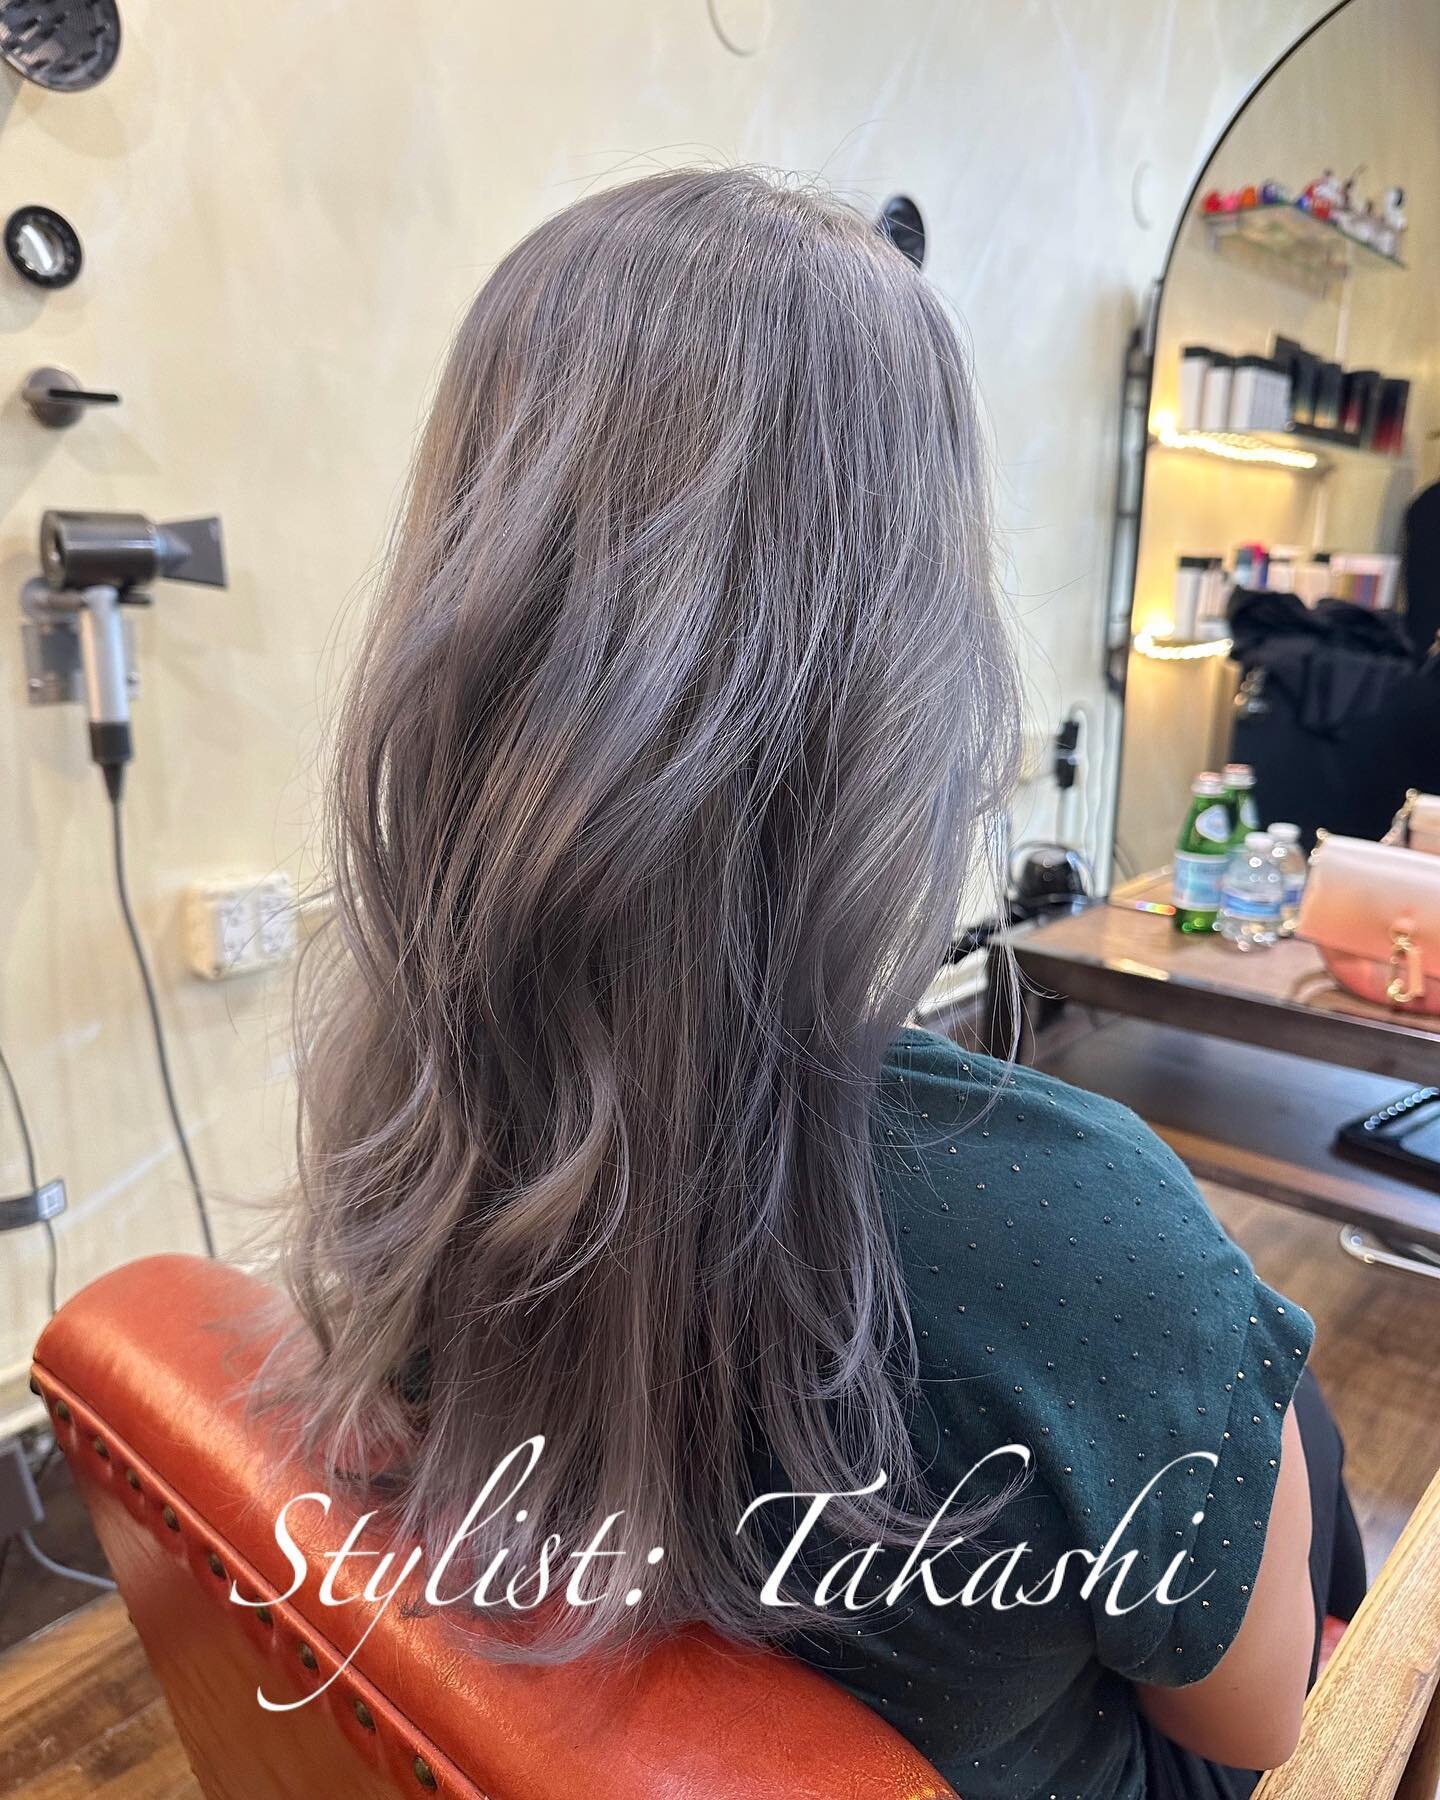 Triple Process Color 
Stylist: Takashi

Light hair coloring for the summer 💁🏼&zwj;♀️
You can book an appointment through our online booking portal found on our website: www.salondefi.com

We offer: cuts, perms (cold, digital, straightening), colori